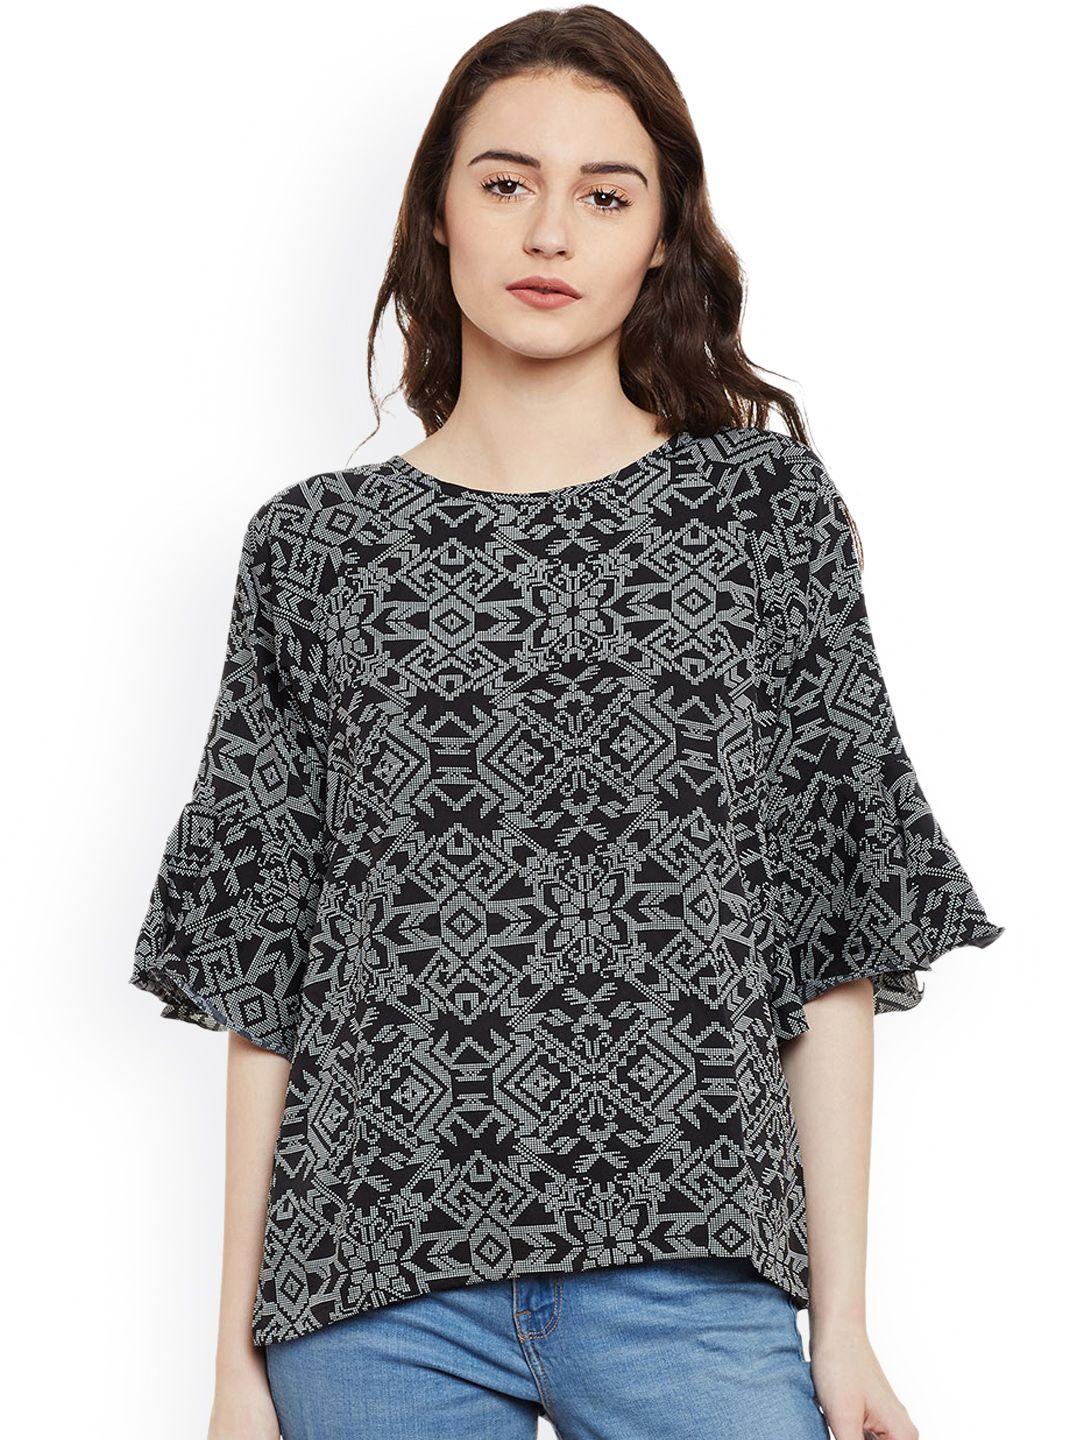 miss-chase-women-black-printed-top